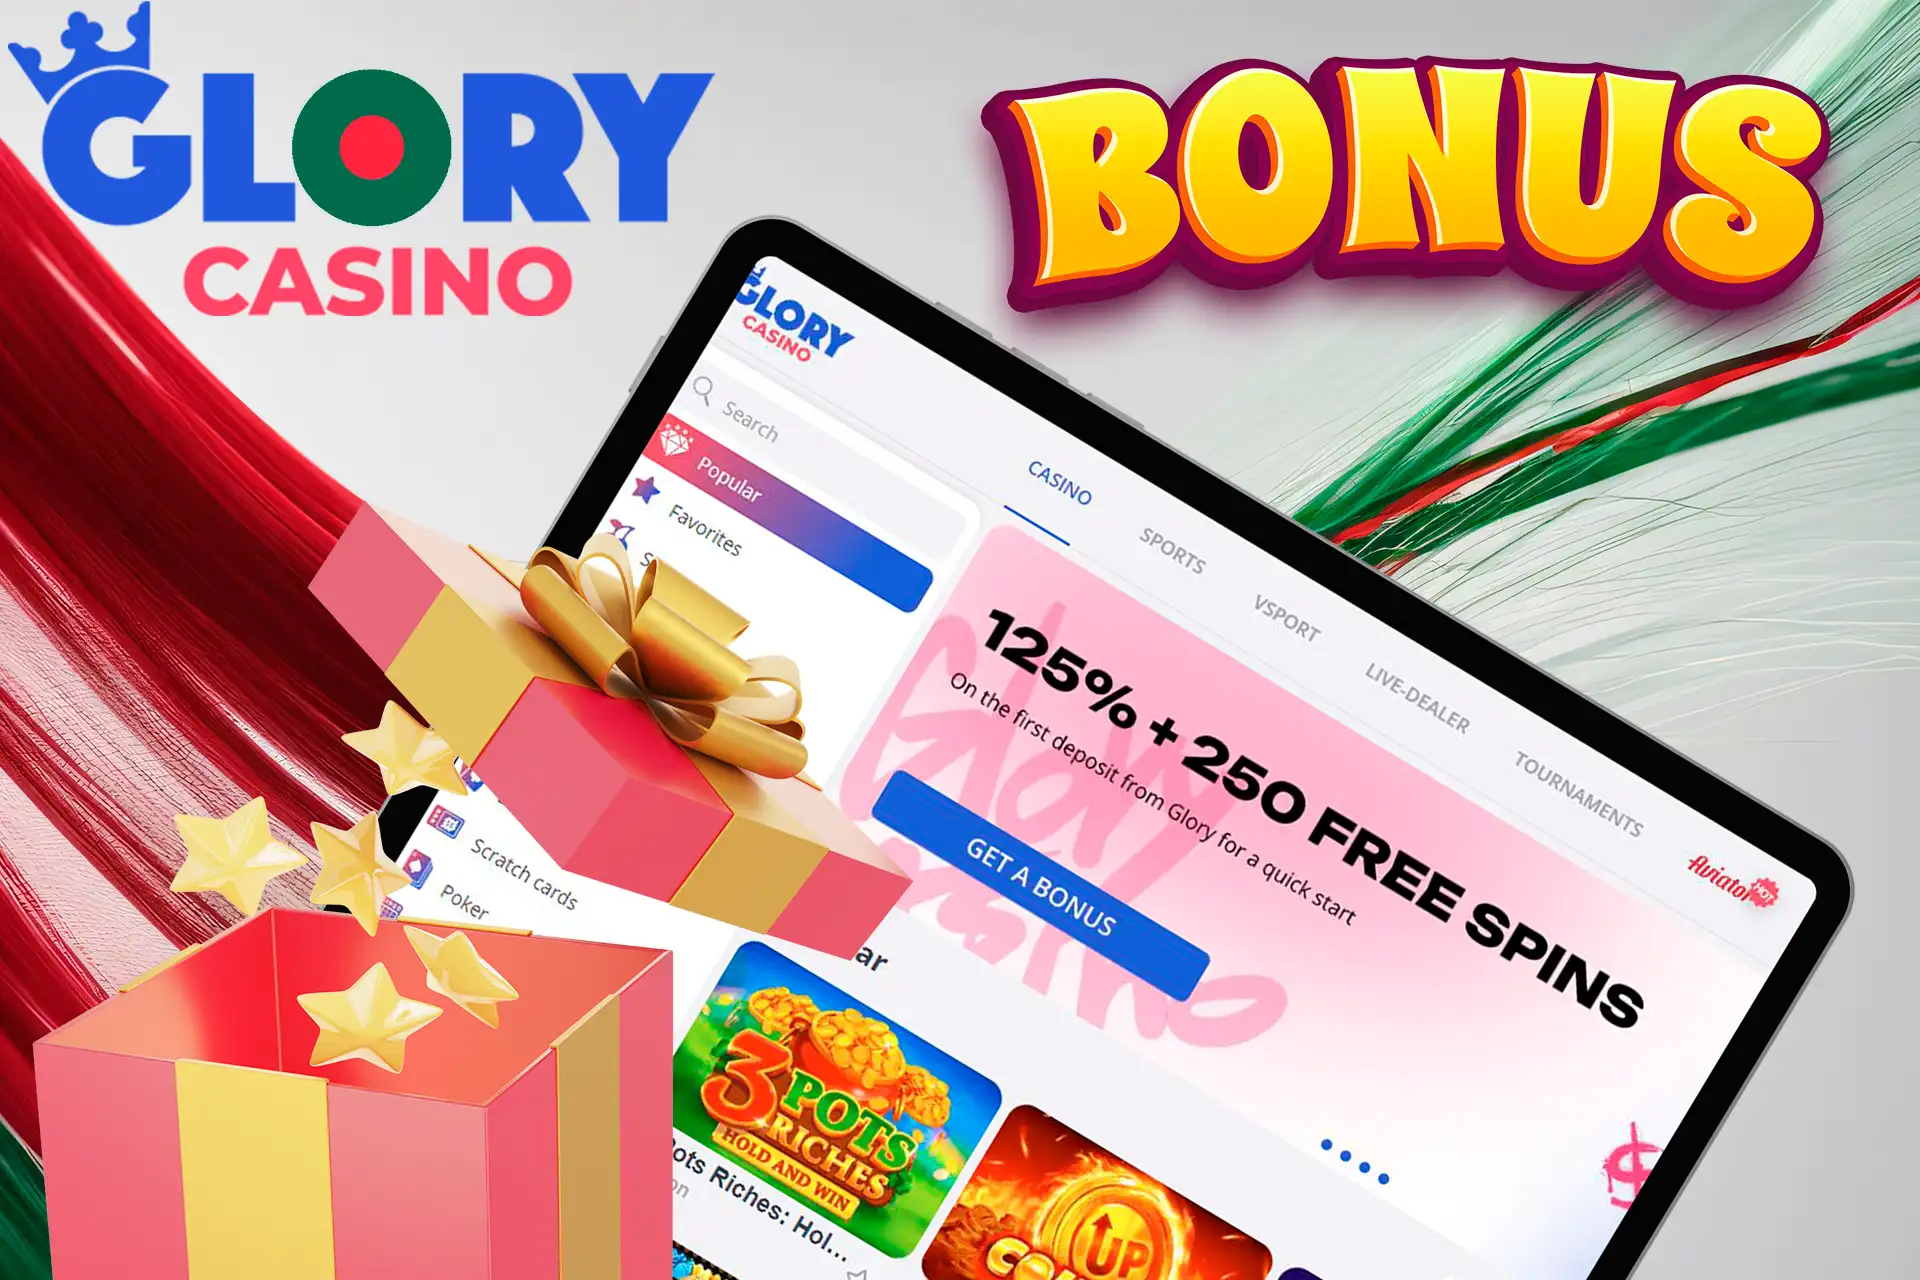 Check out the best bonus offer from Glory Casino Bangladesh